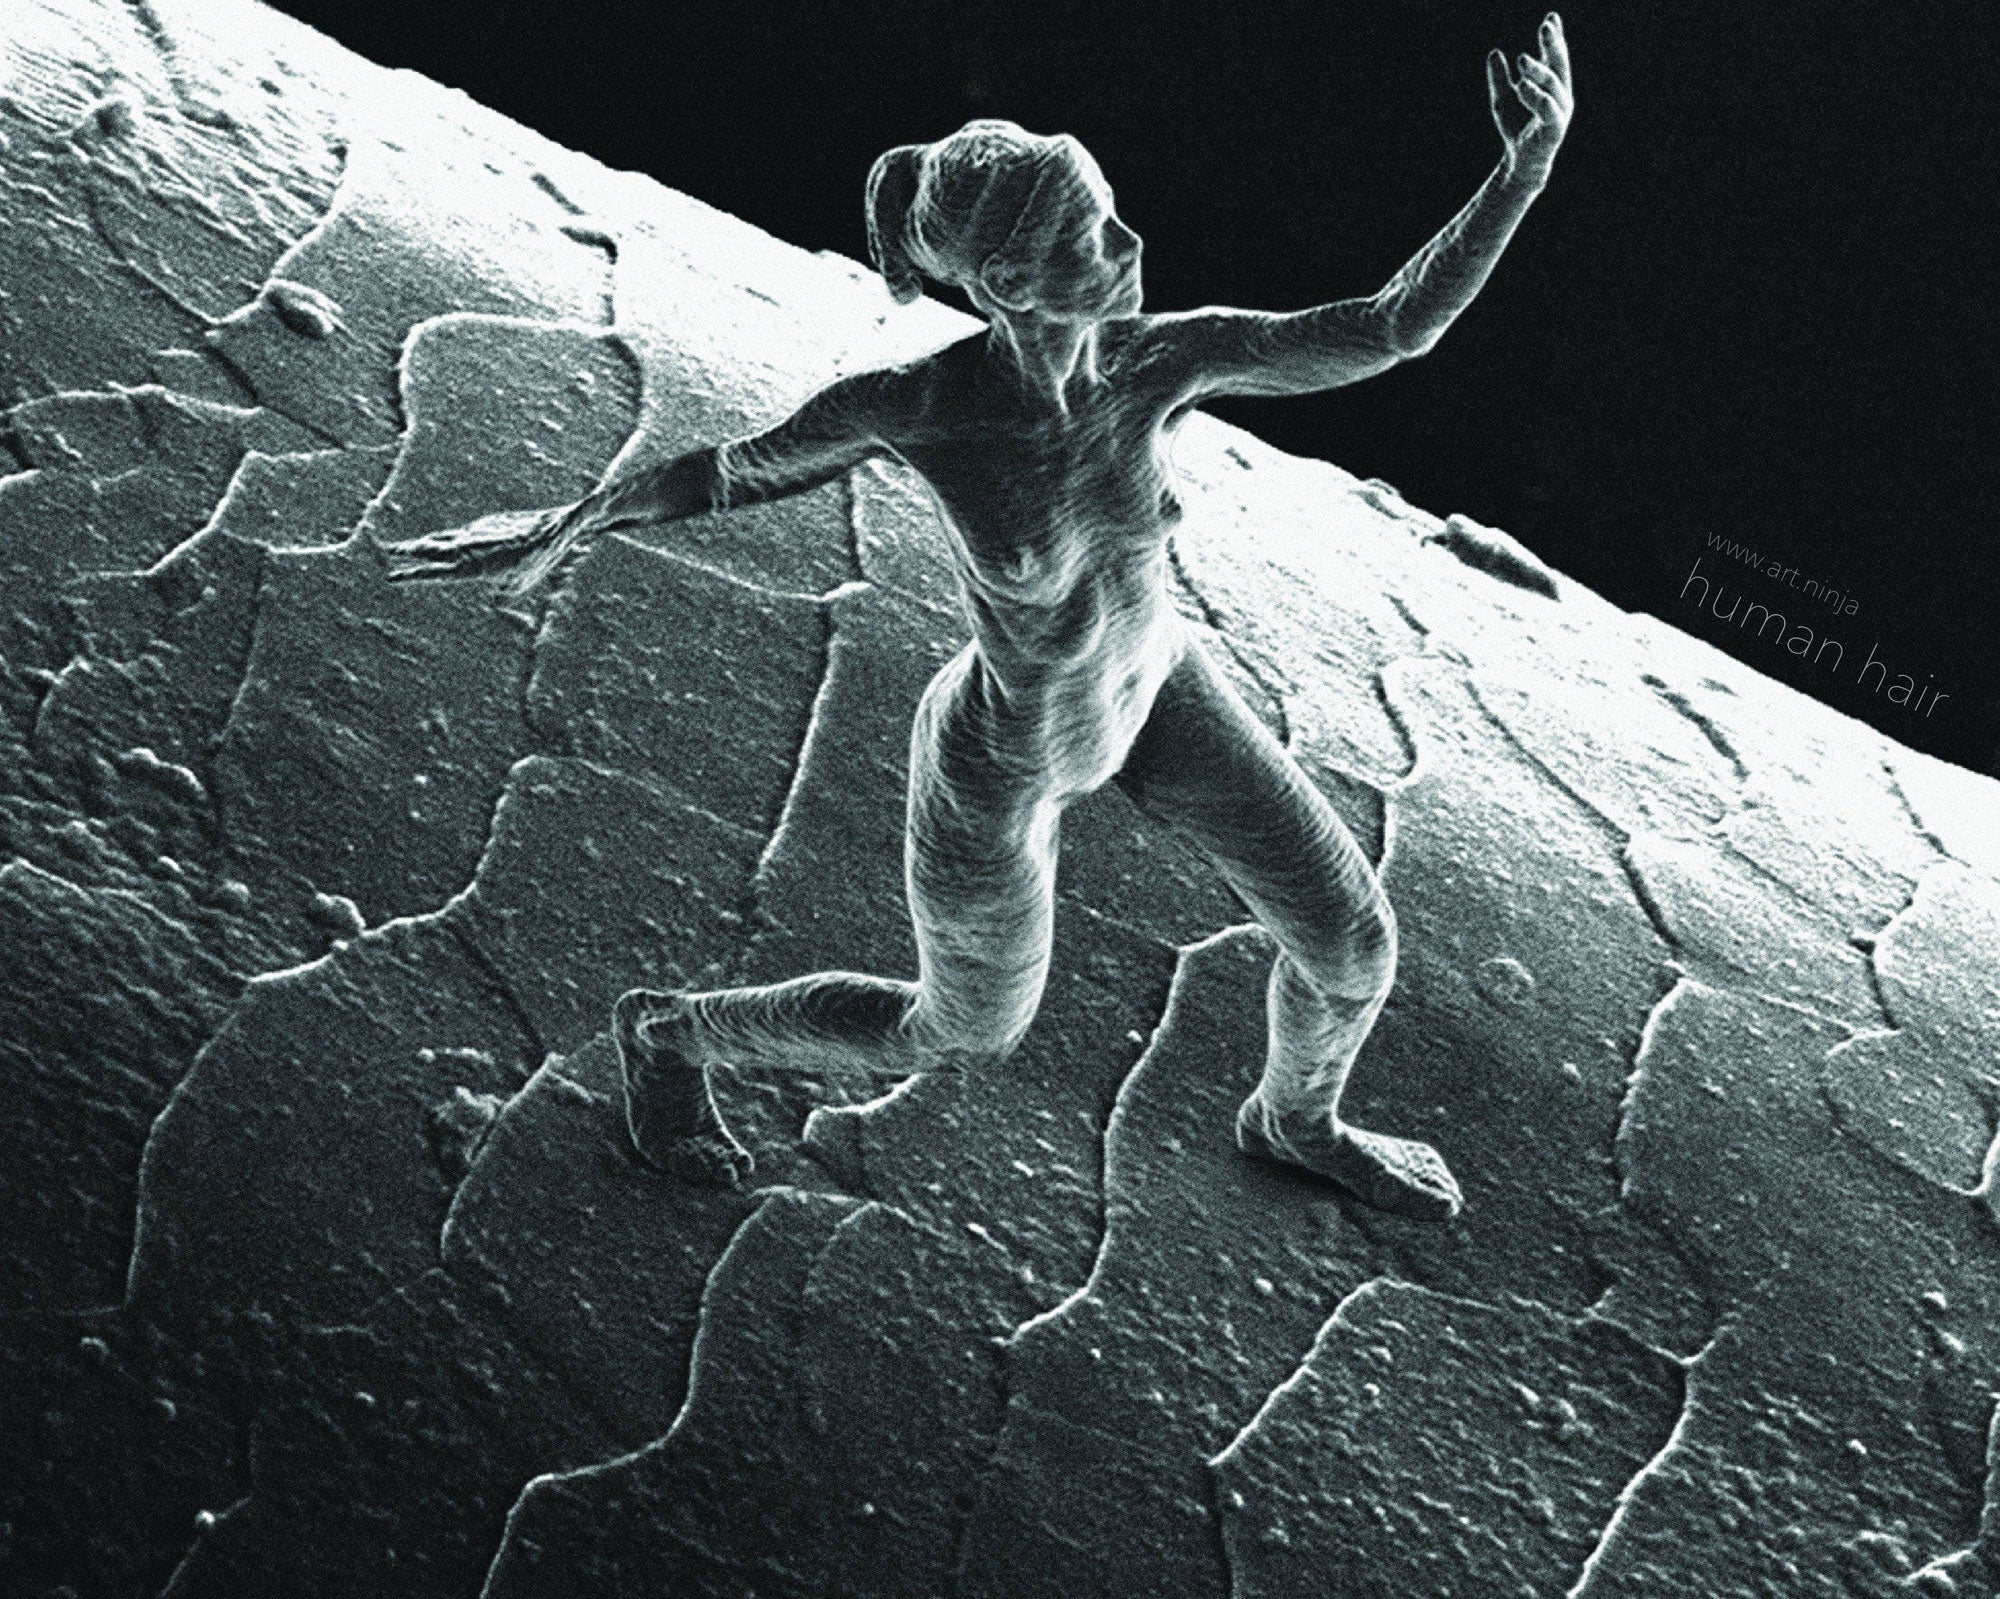 'Trust' by Jonty Hurwitz is the smallest sculpture ever made, approximately 80 by 100 by 20 microns